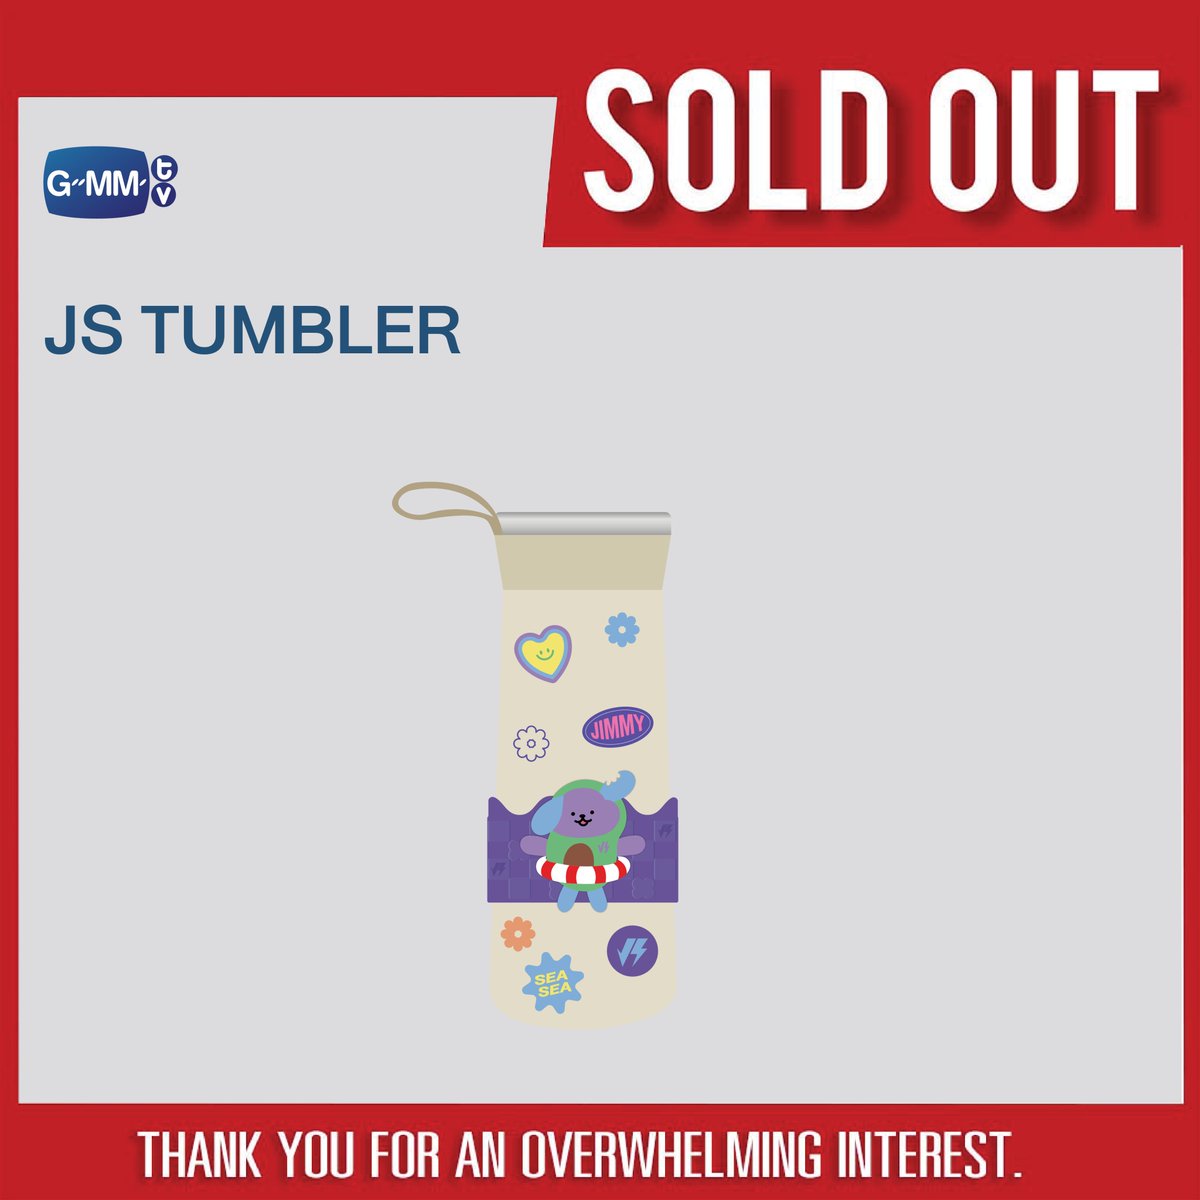 SOLD OUT! 🎉 🙏🏻 Thank you for an overwhelming interest in JS TUMBLER. #LastTwilightOnStage #JimmySea #จิมมี่ซี #GMMTV